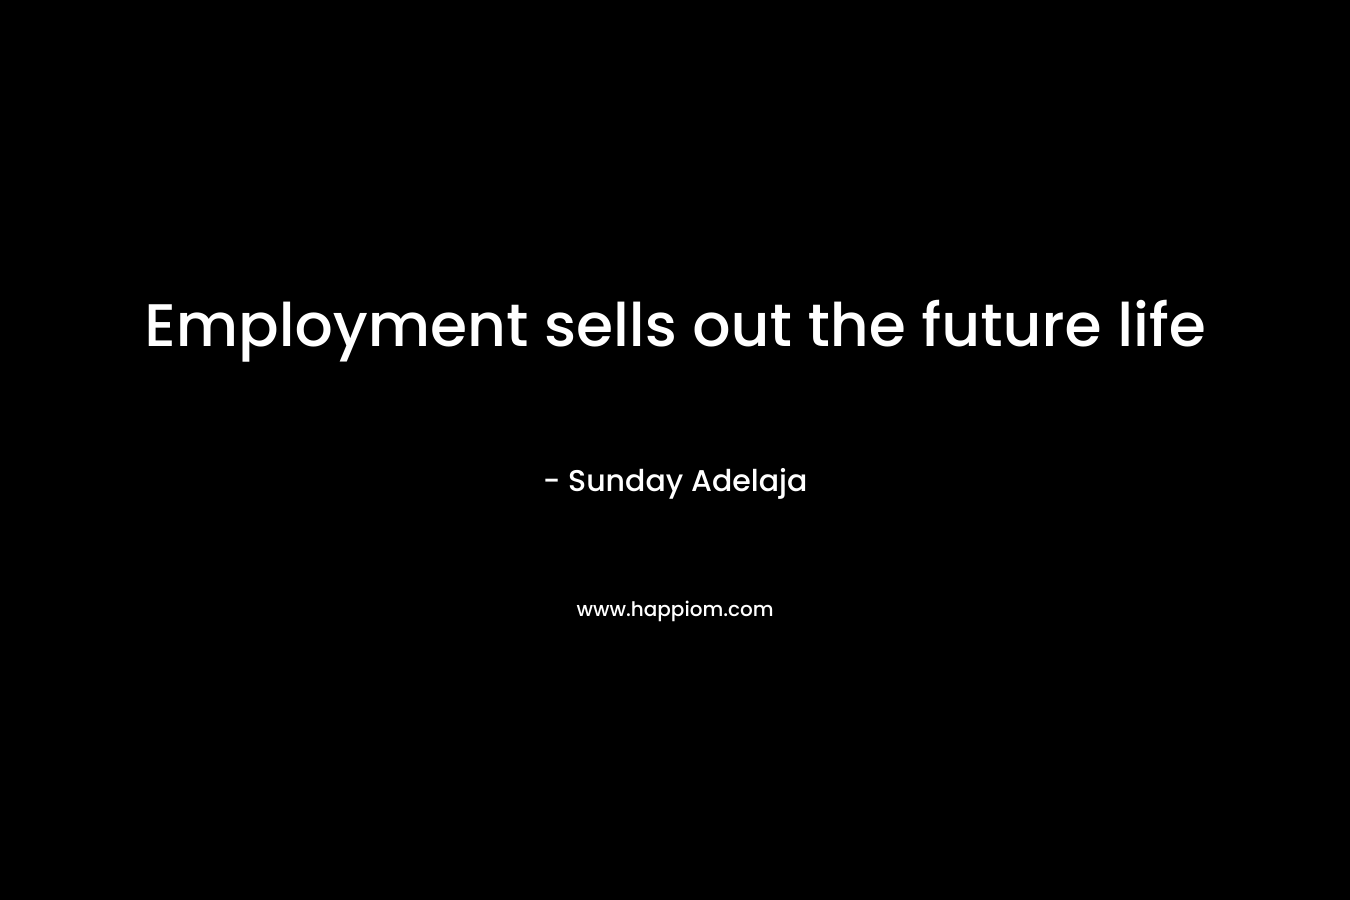 Employment sells out the future life